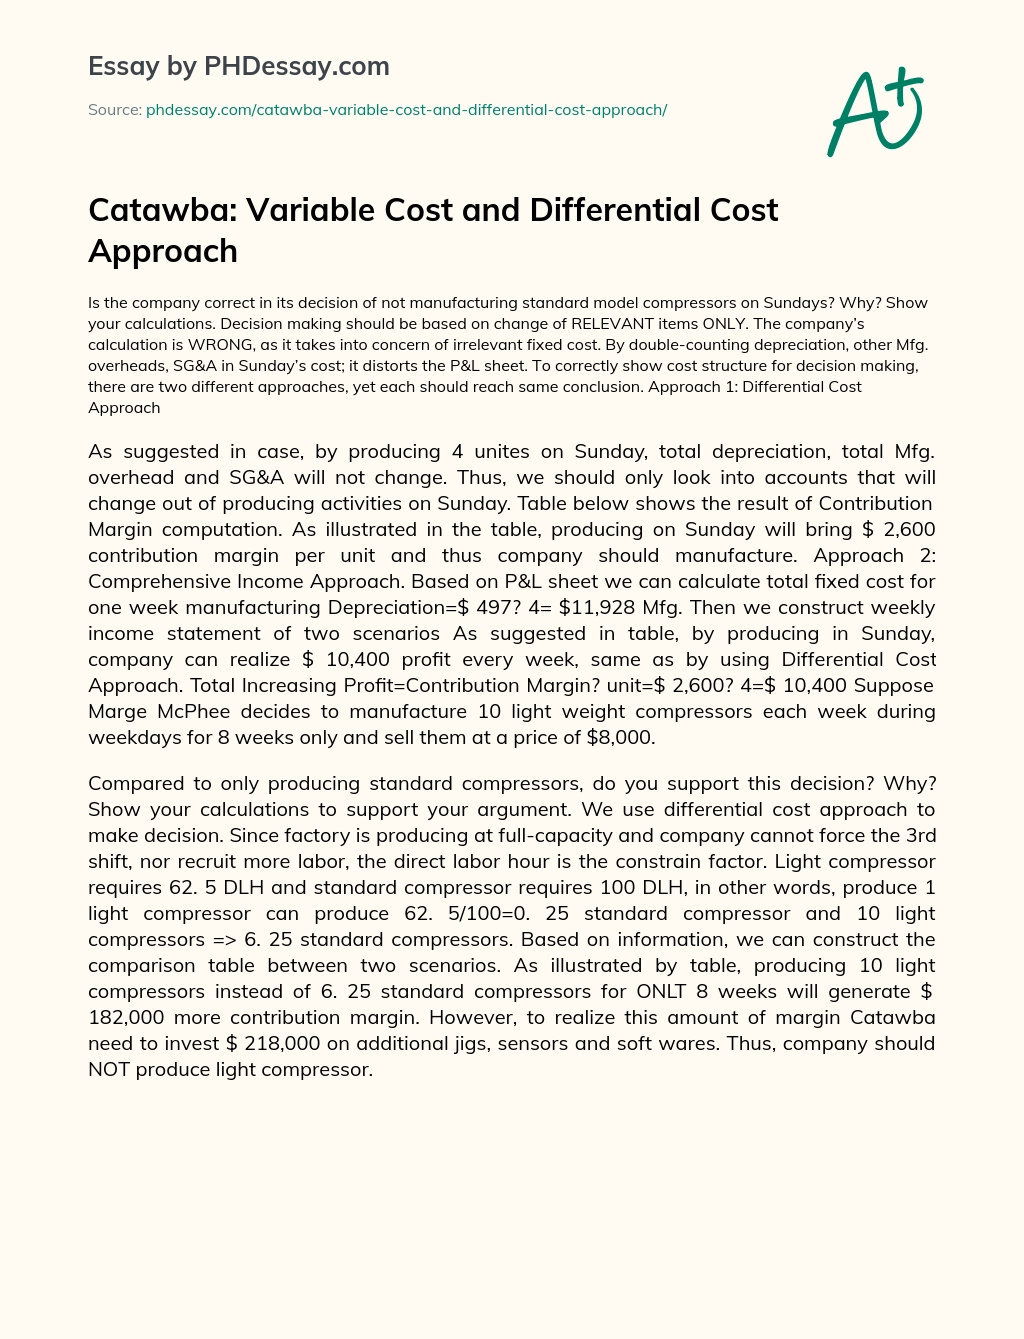 Catawba: Variable Cost and Differential Cost Approach essay